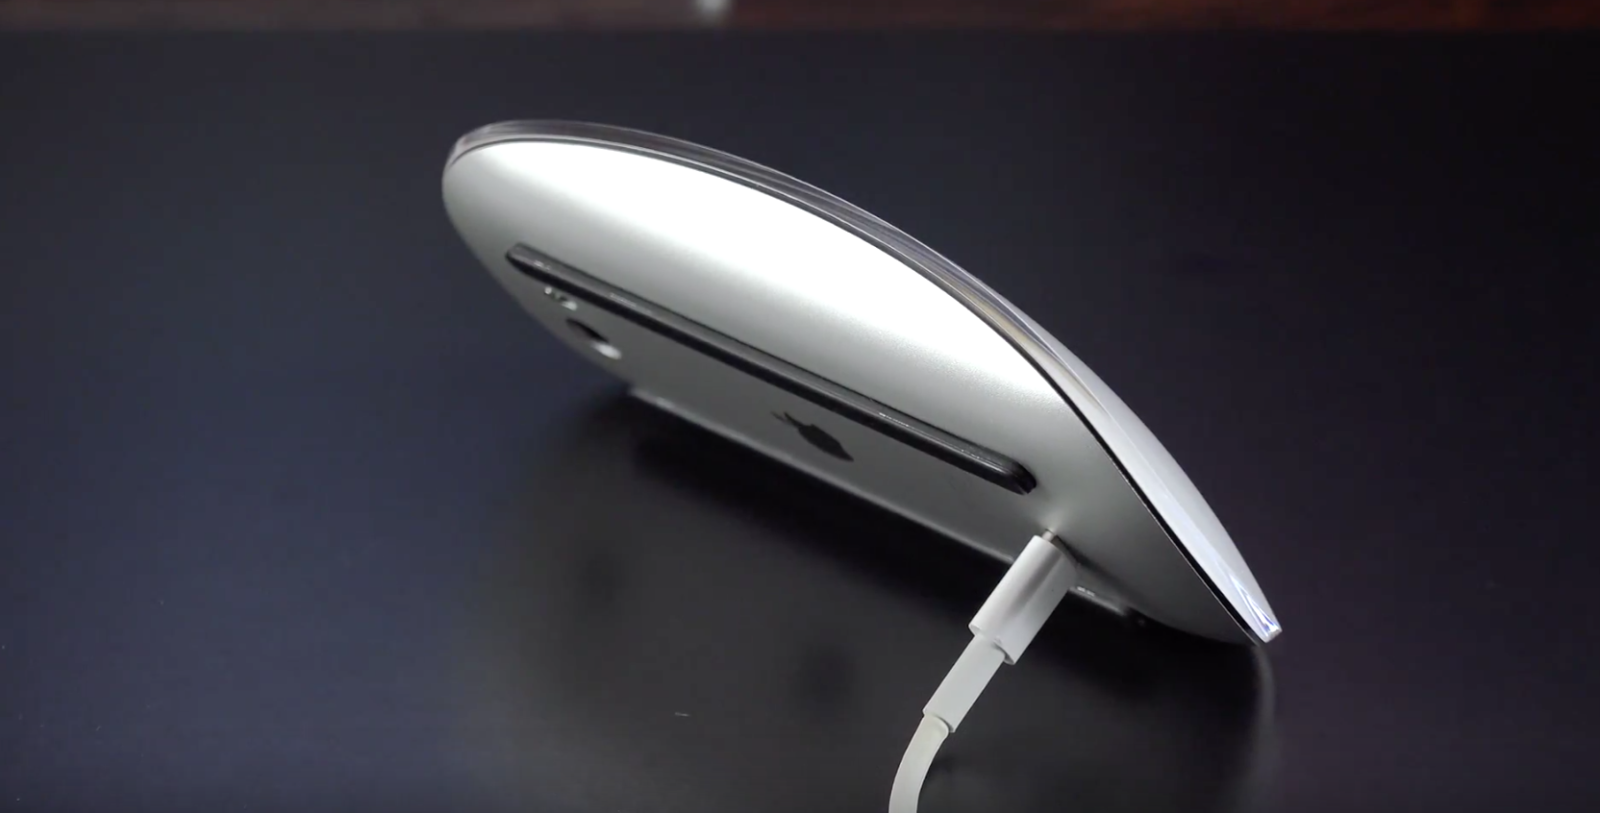 Difference Between An Apple Magic Mouse 1 And 2 (Let's Find Out